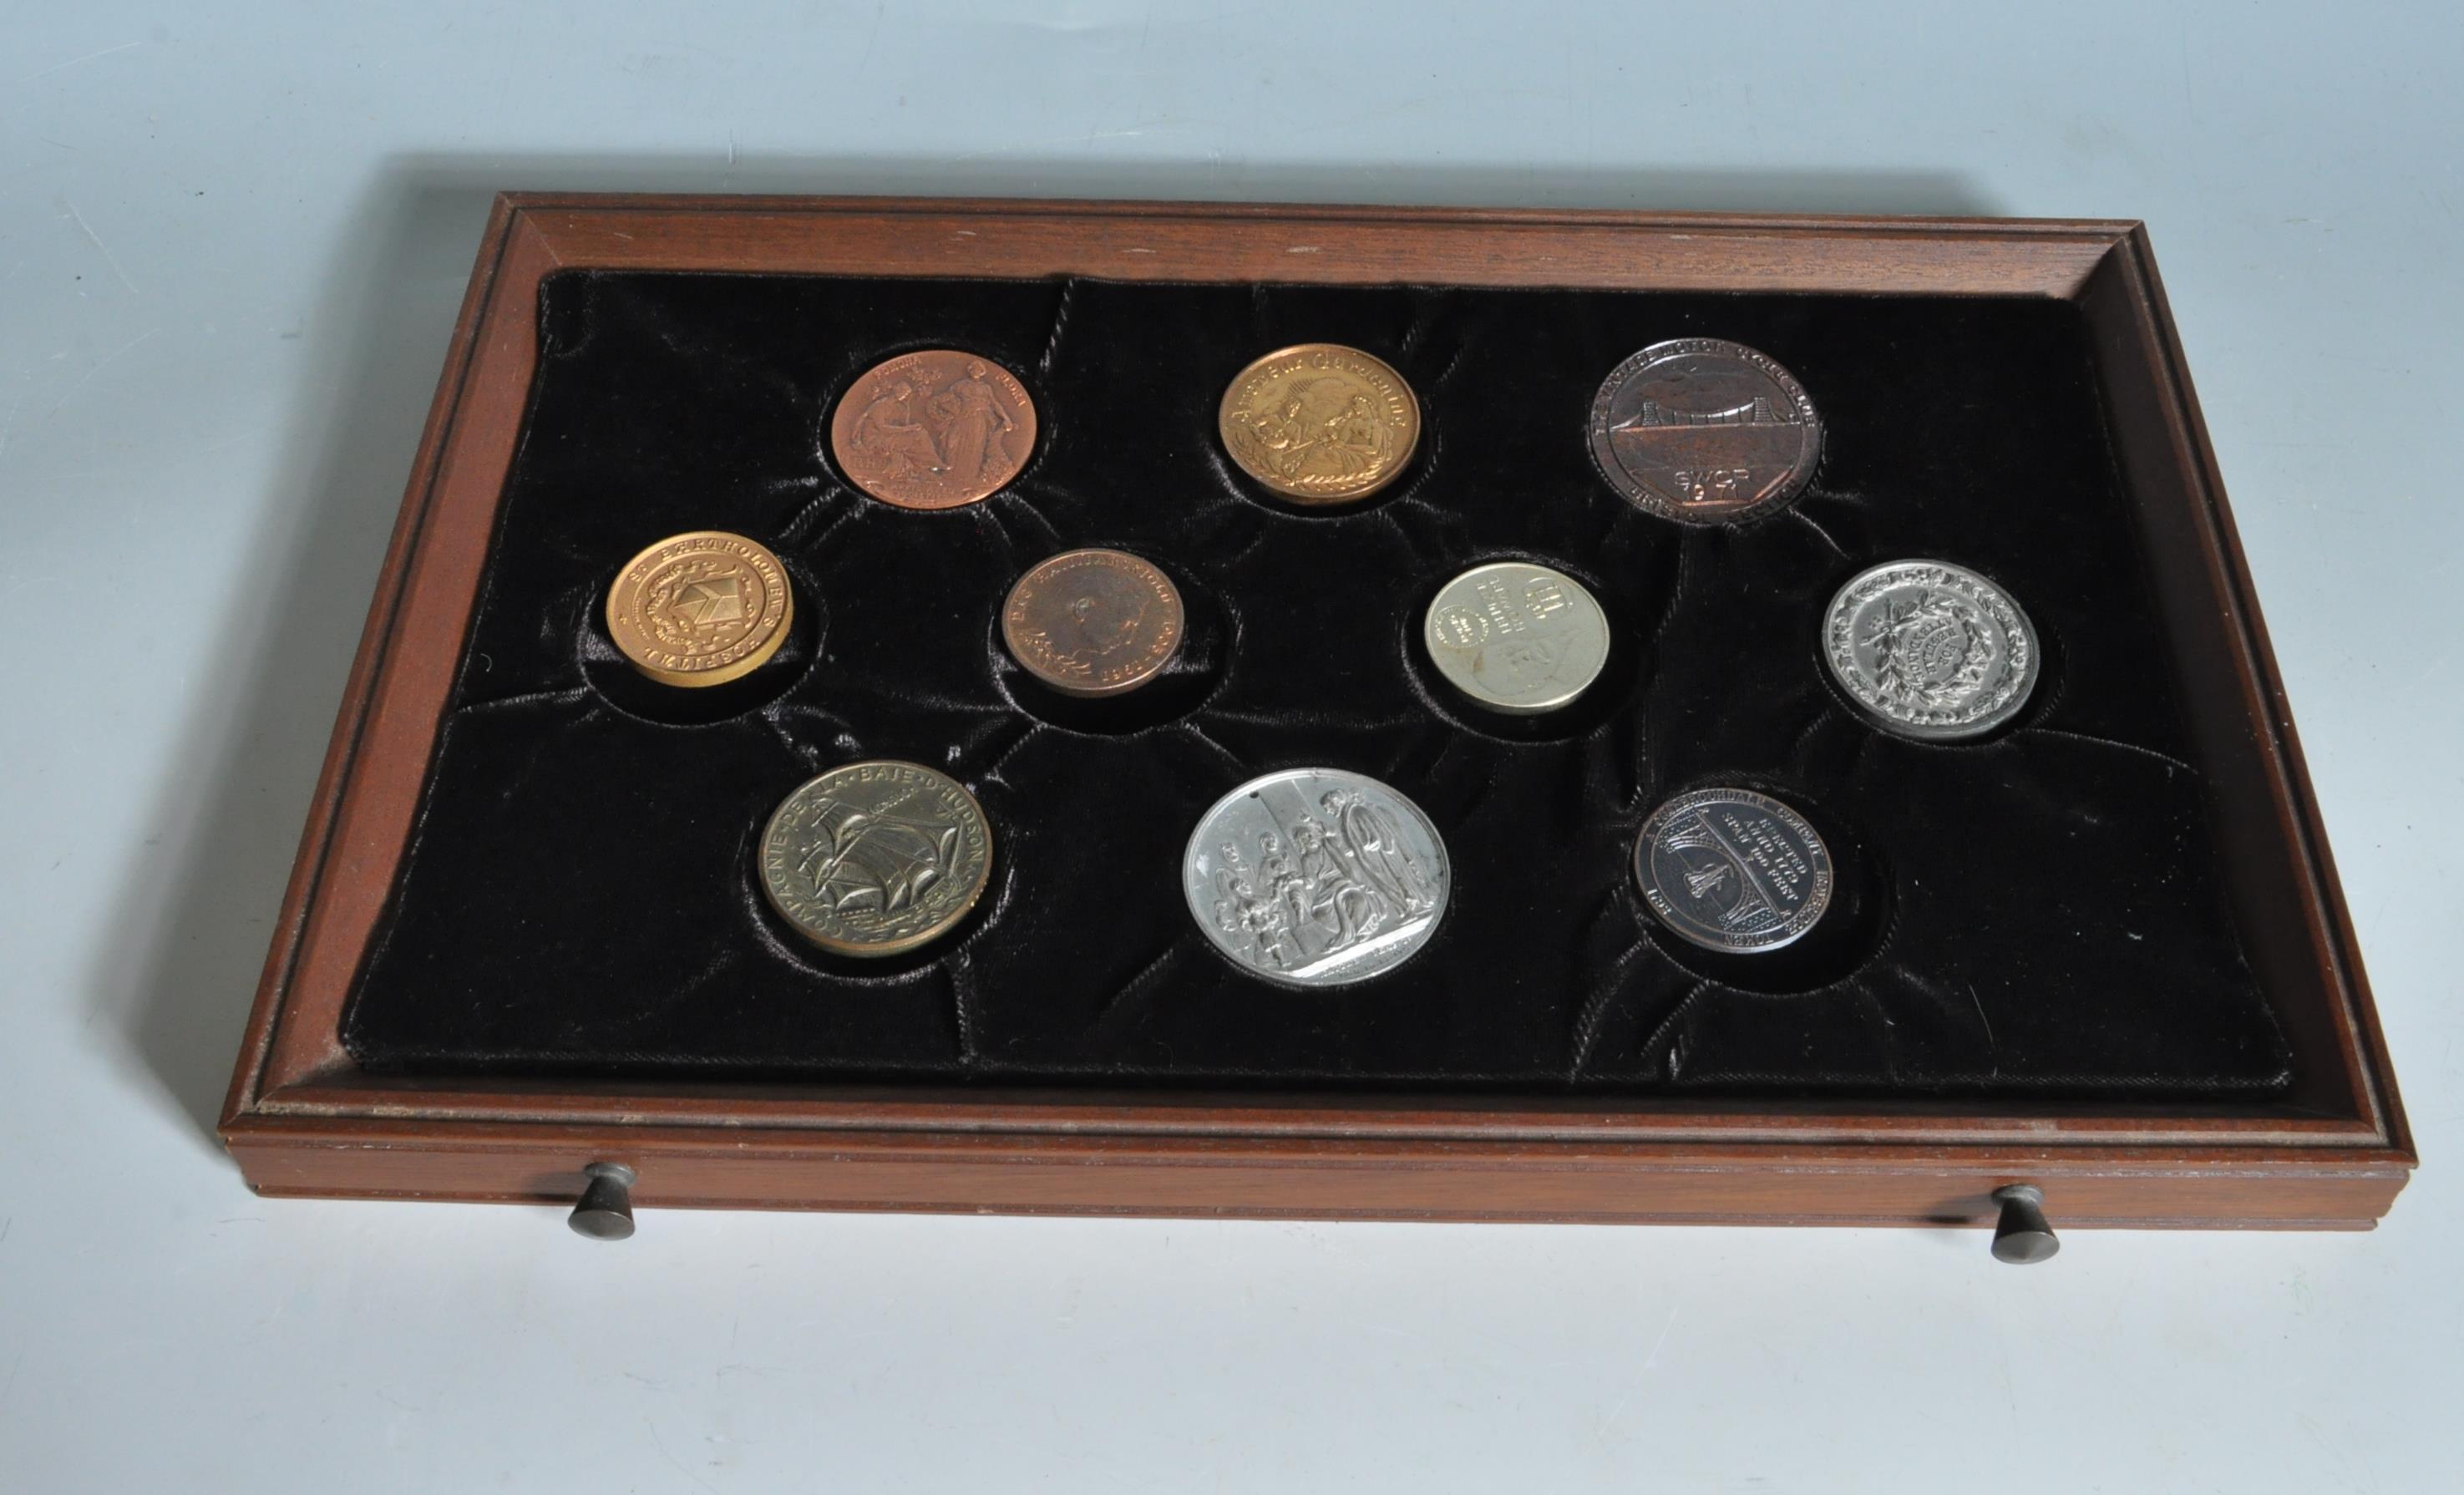 COLLECTION OF COINS AND MEDALS IN A WOODEN BOX - Image 5 of 11